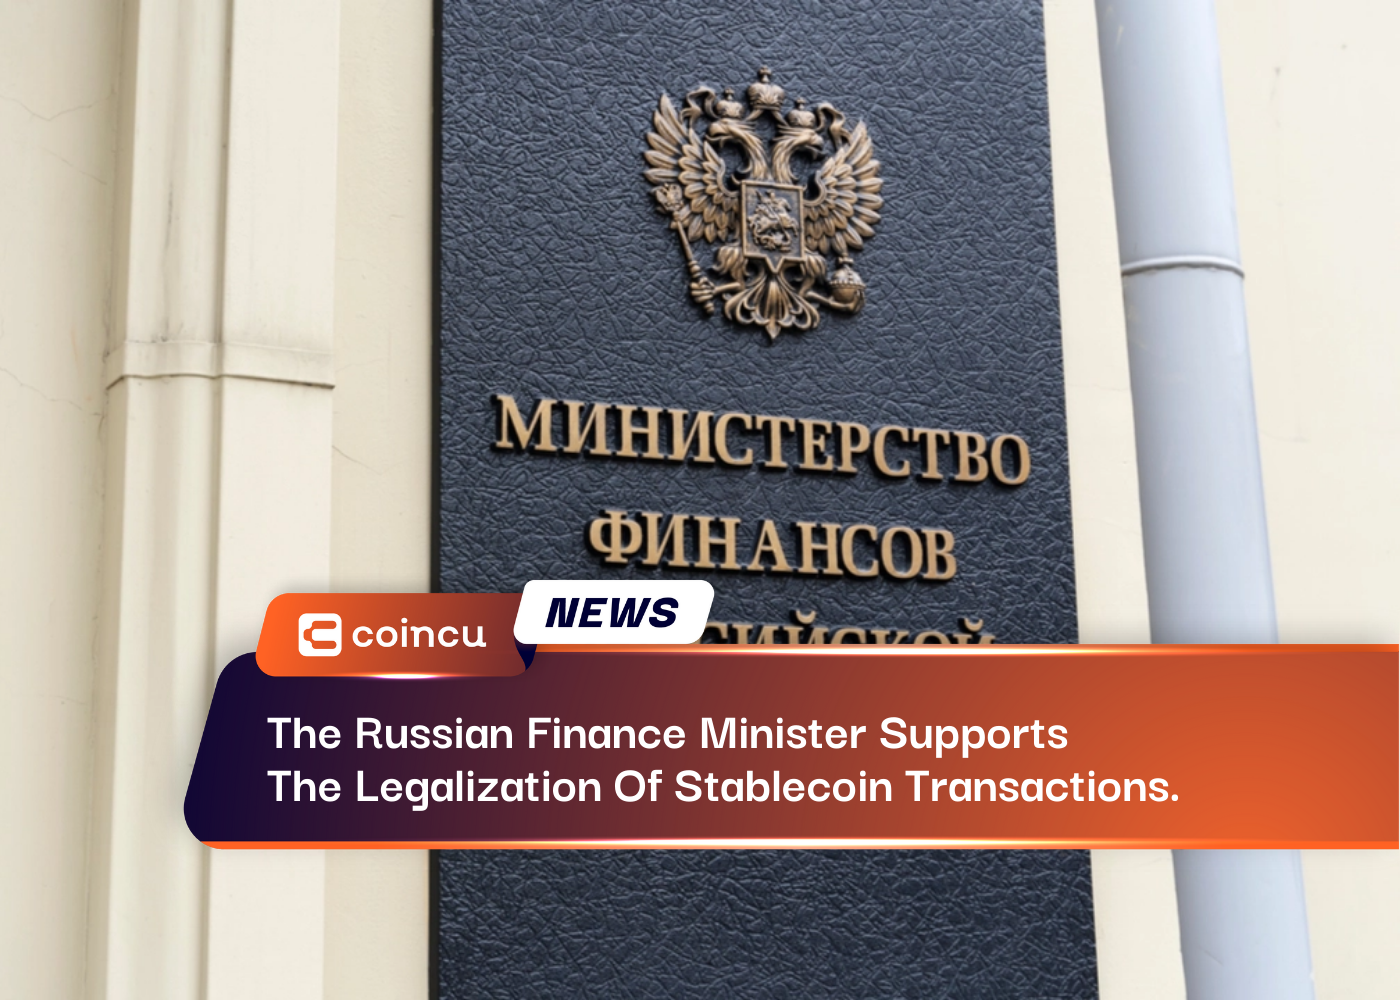 The Russian Finance Minister Supports The Legalization Of Stablecoin Transactions.